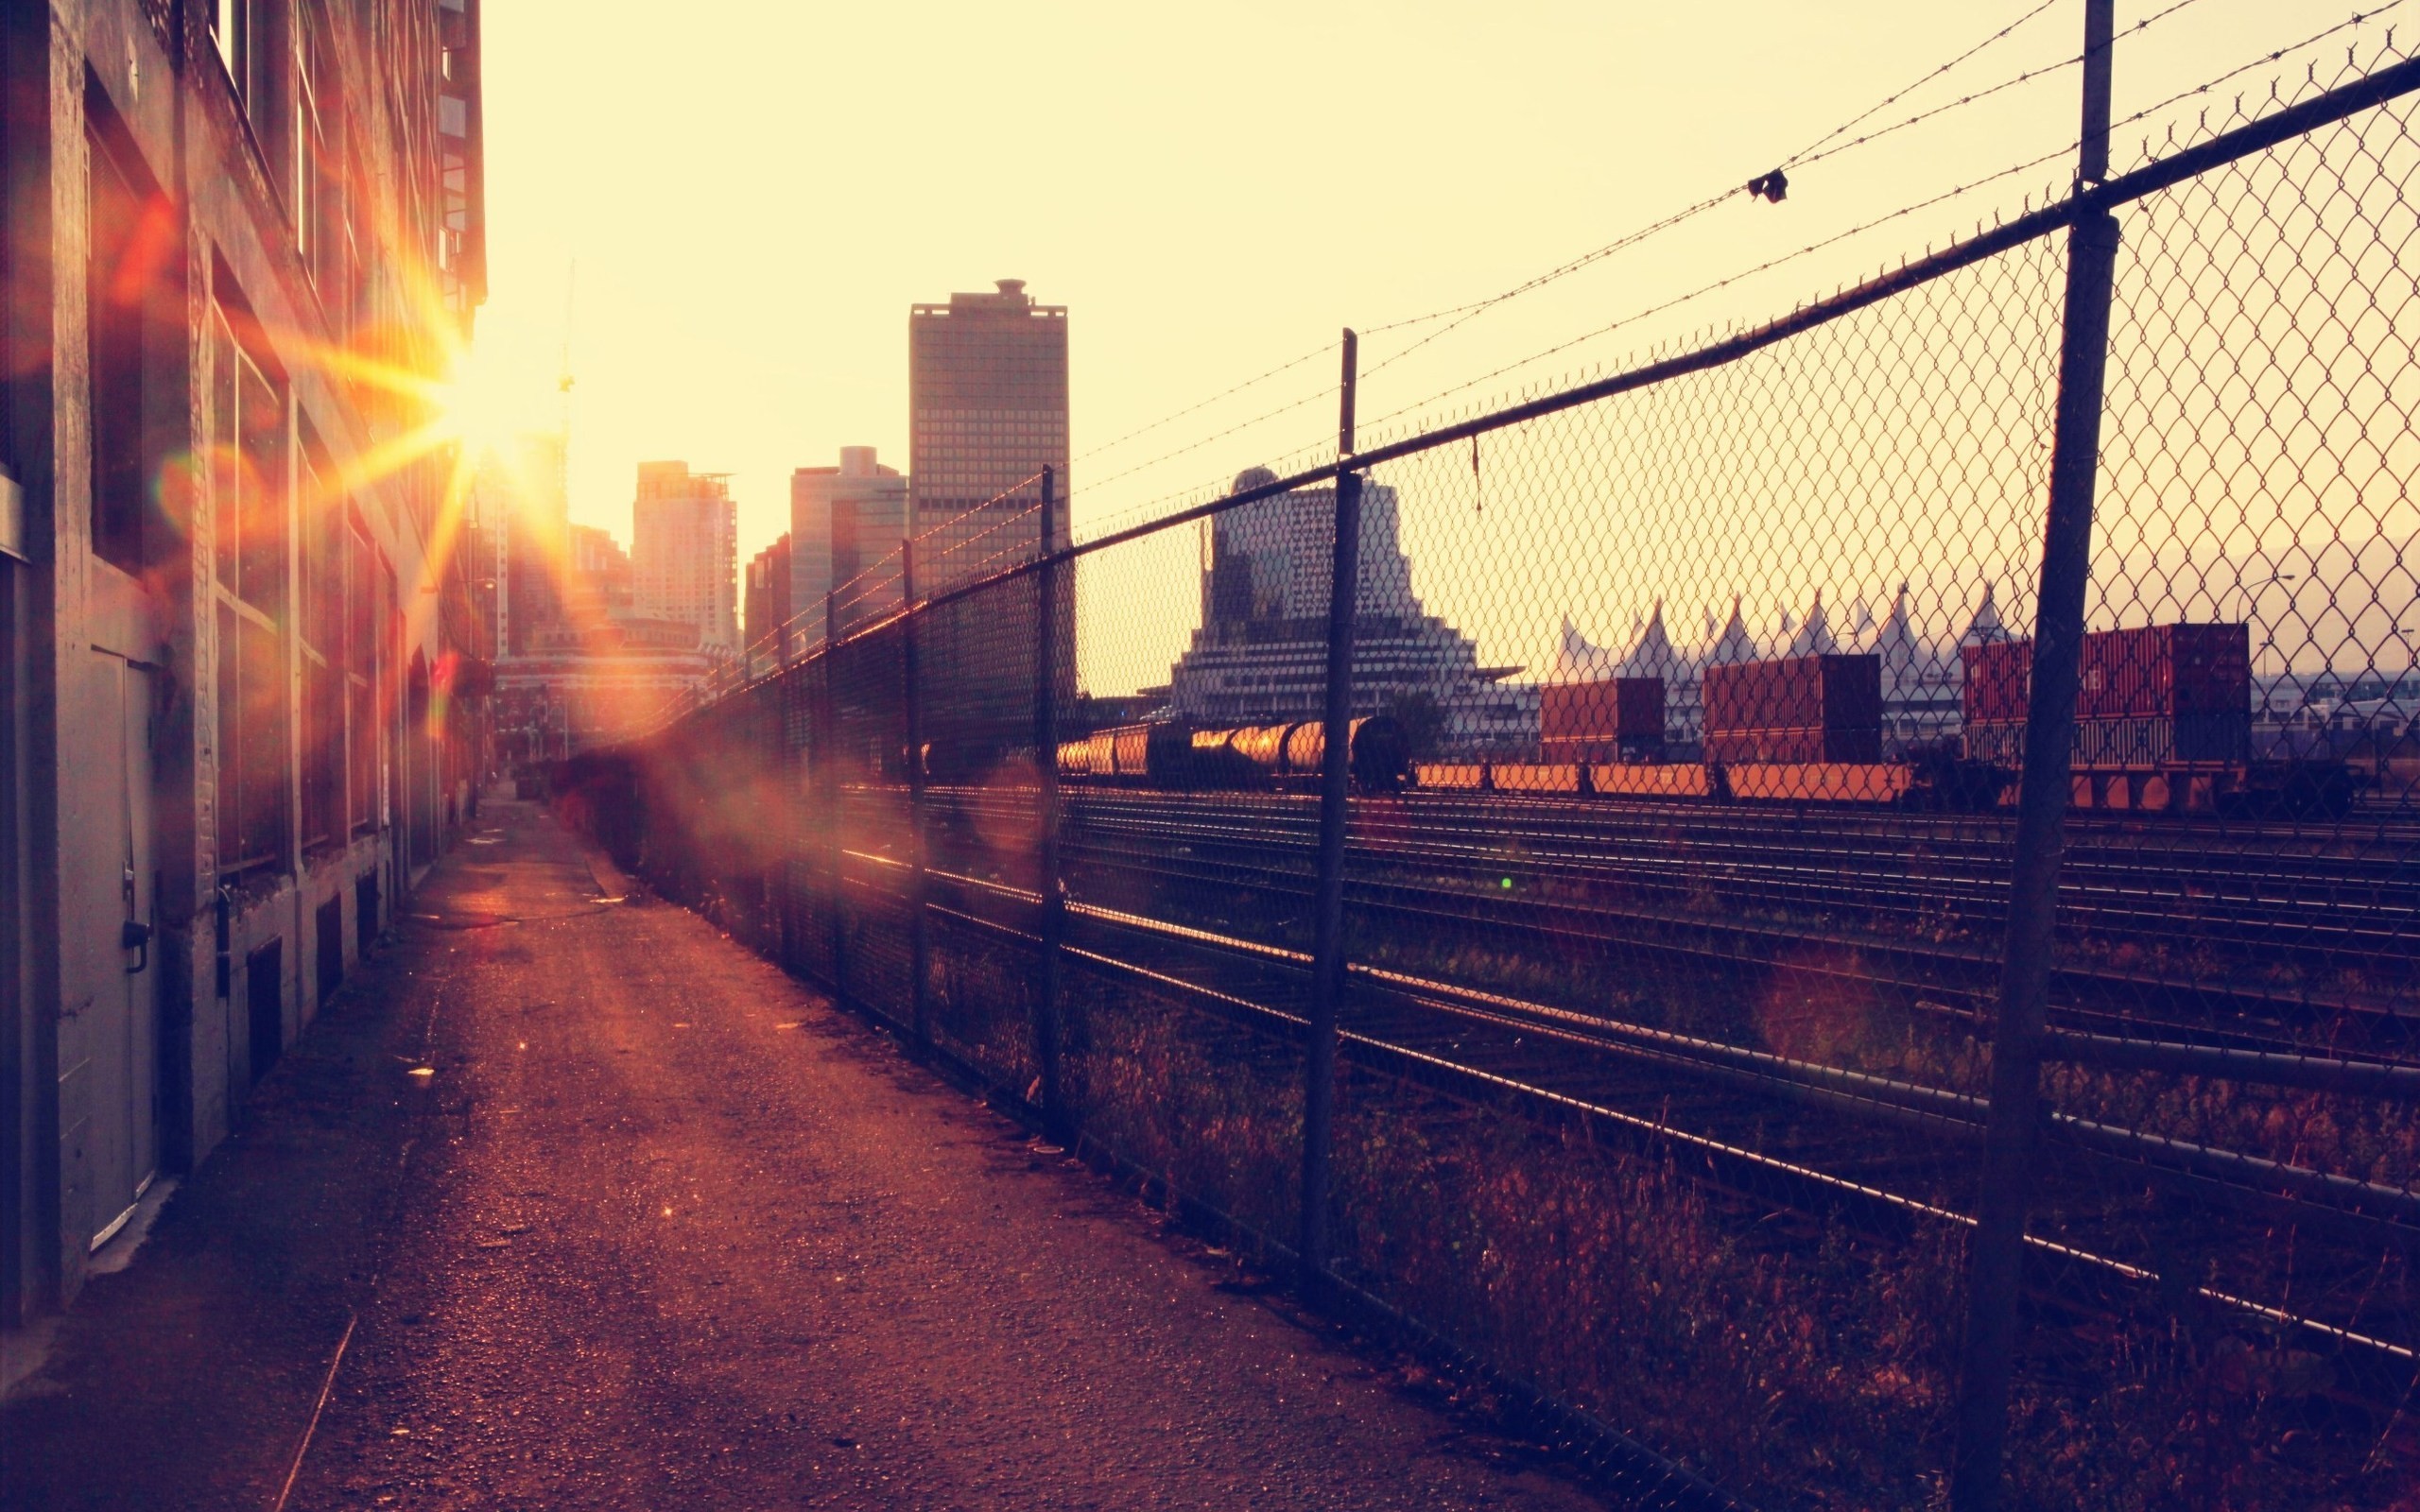 photography, Urban, Architecture, Building, Sunset, Railway, Cityscape, City Wallpaper